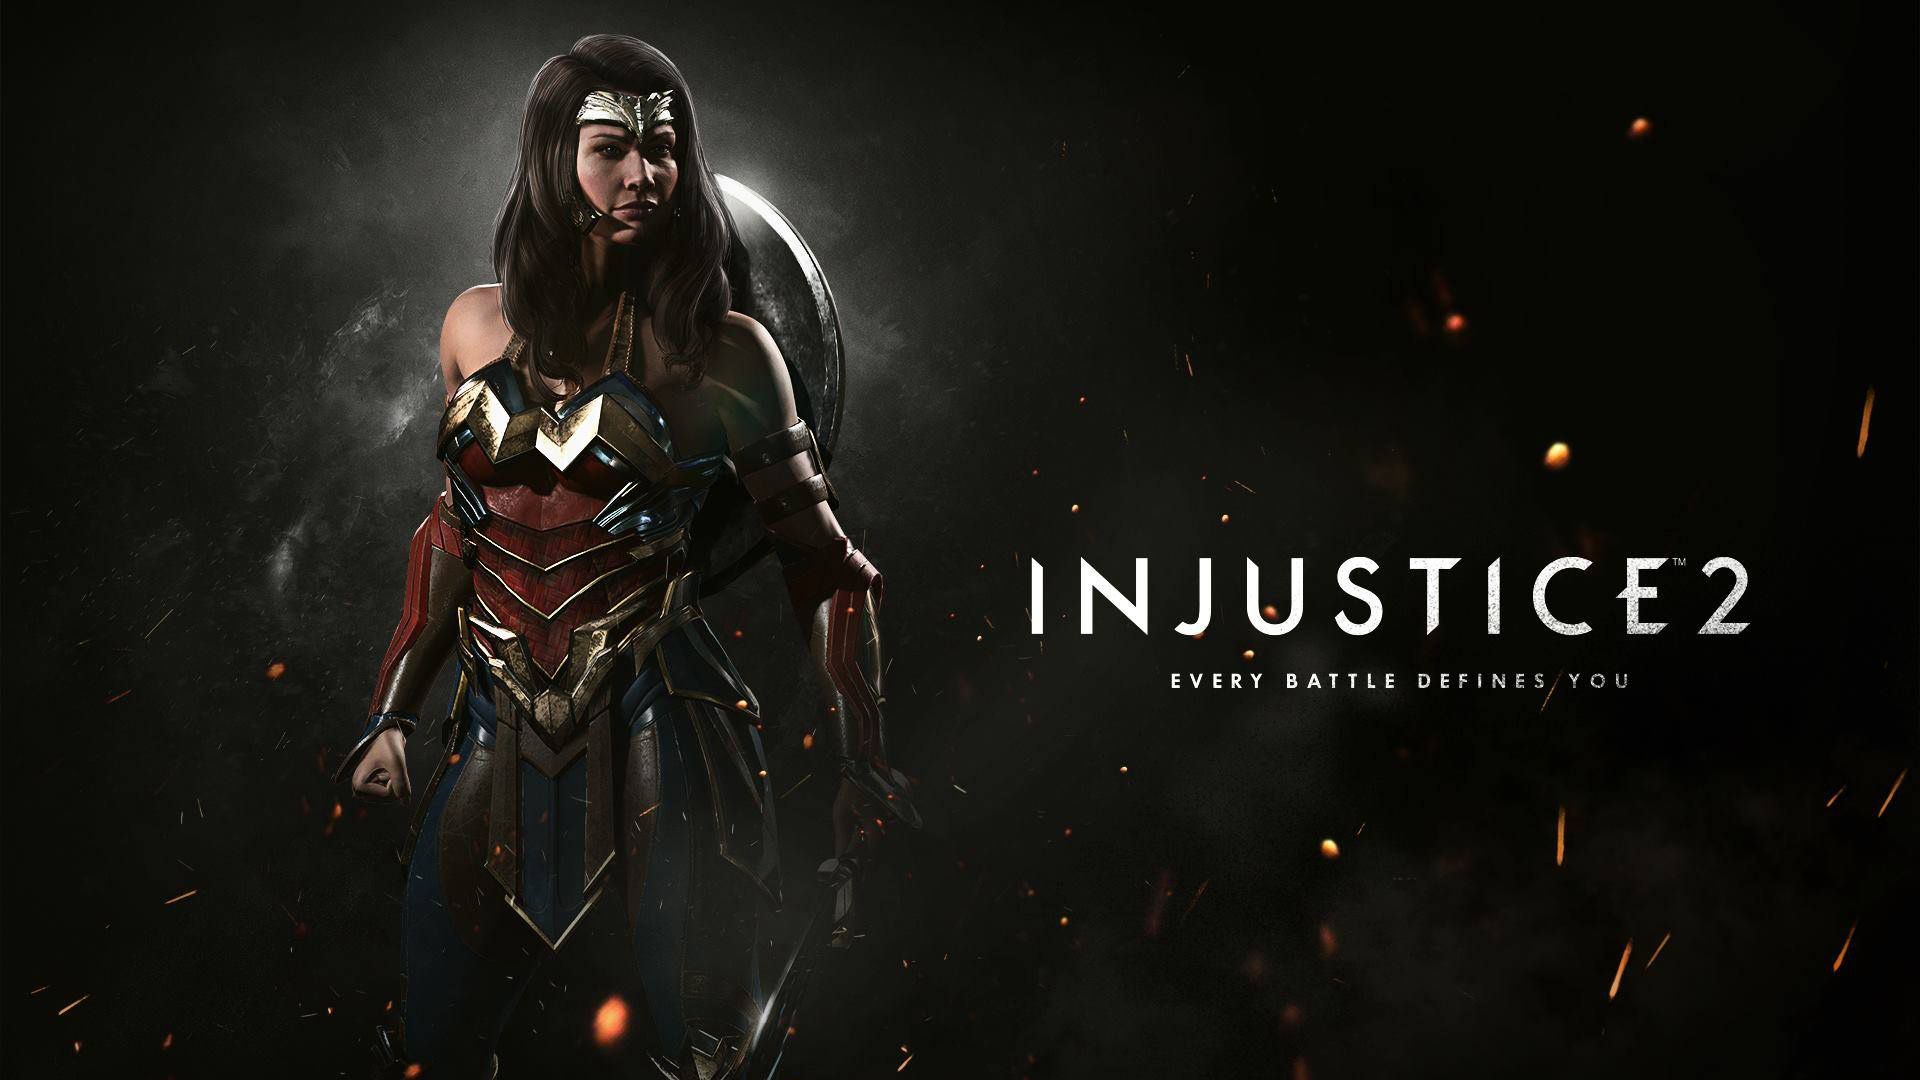 Wonder Woman In Injustice HD Games, 4k Wallpaper, Image, Background, Photo and Picture